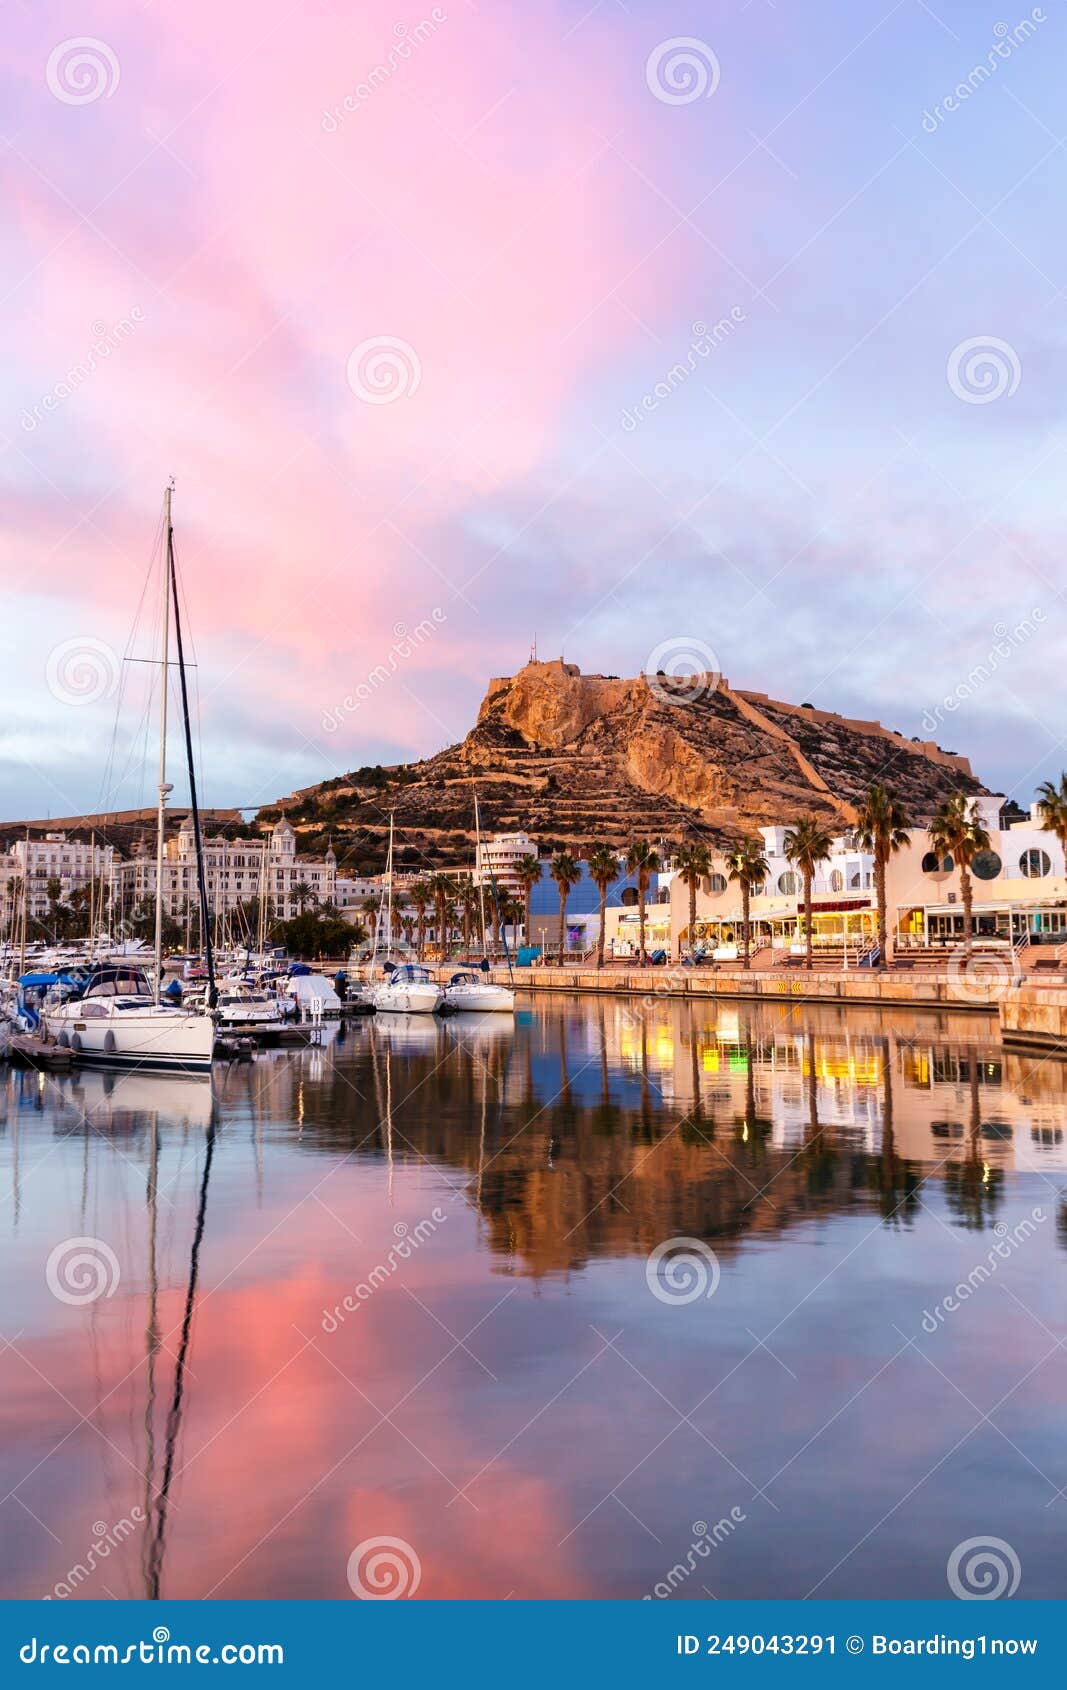 alicante port d`alacant marina with boats and view of castle castillo evening travel traveling holidays vacation portrait format